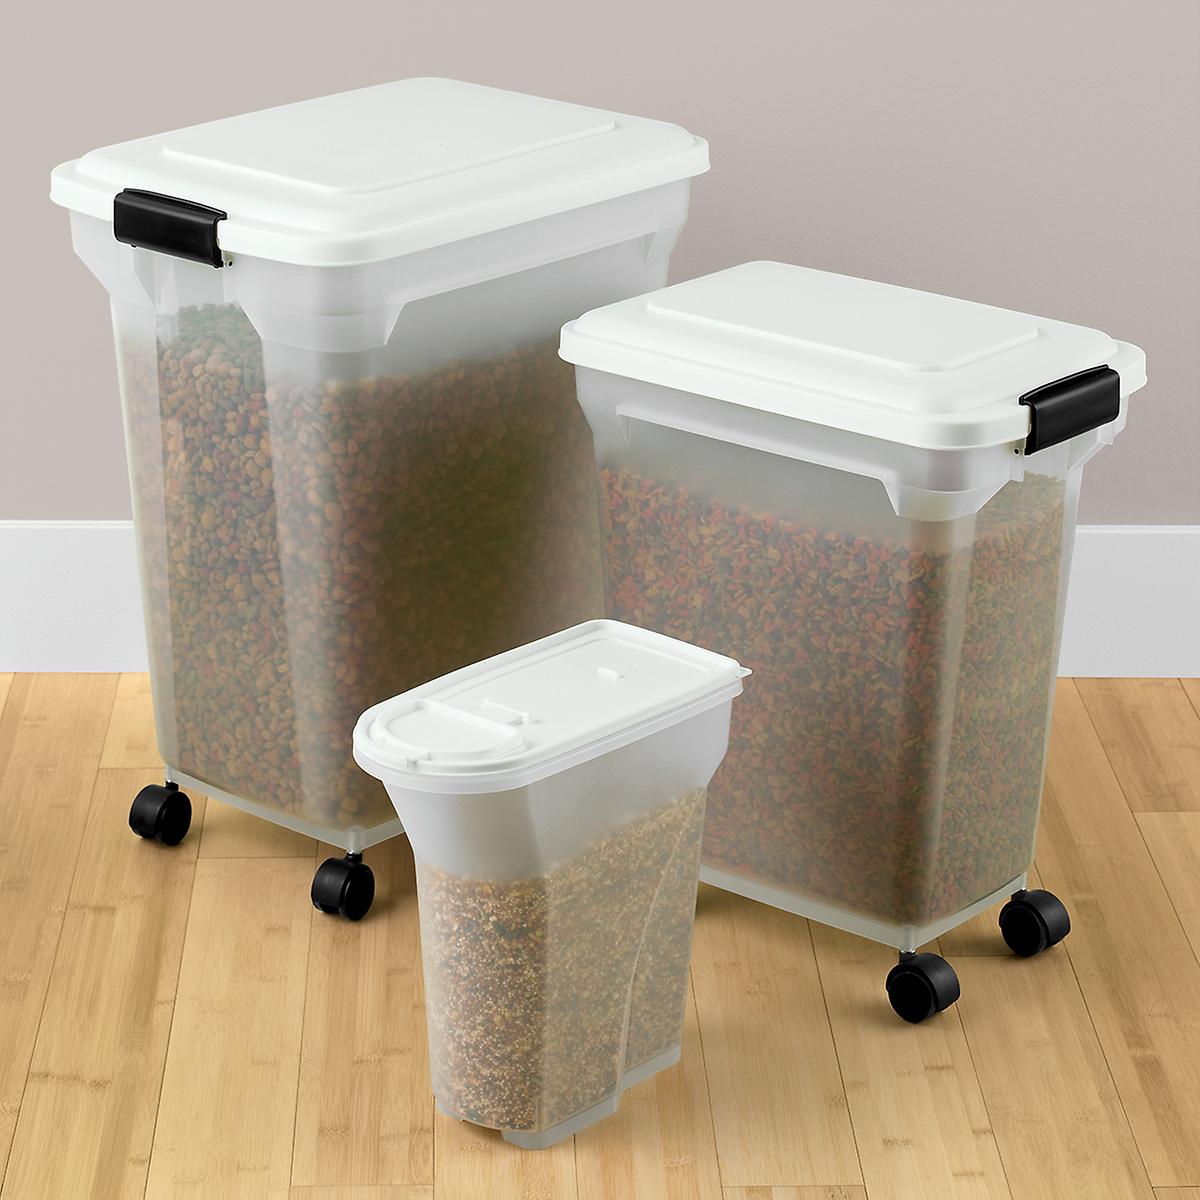 dog food storage containers